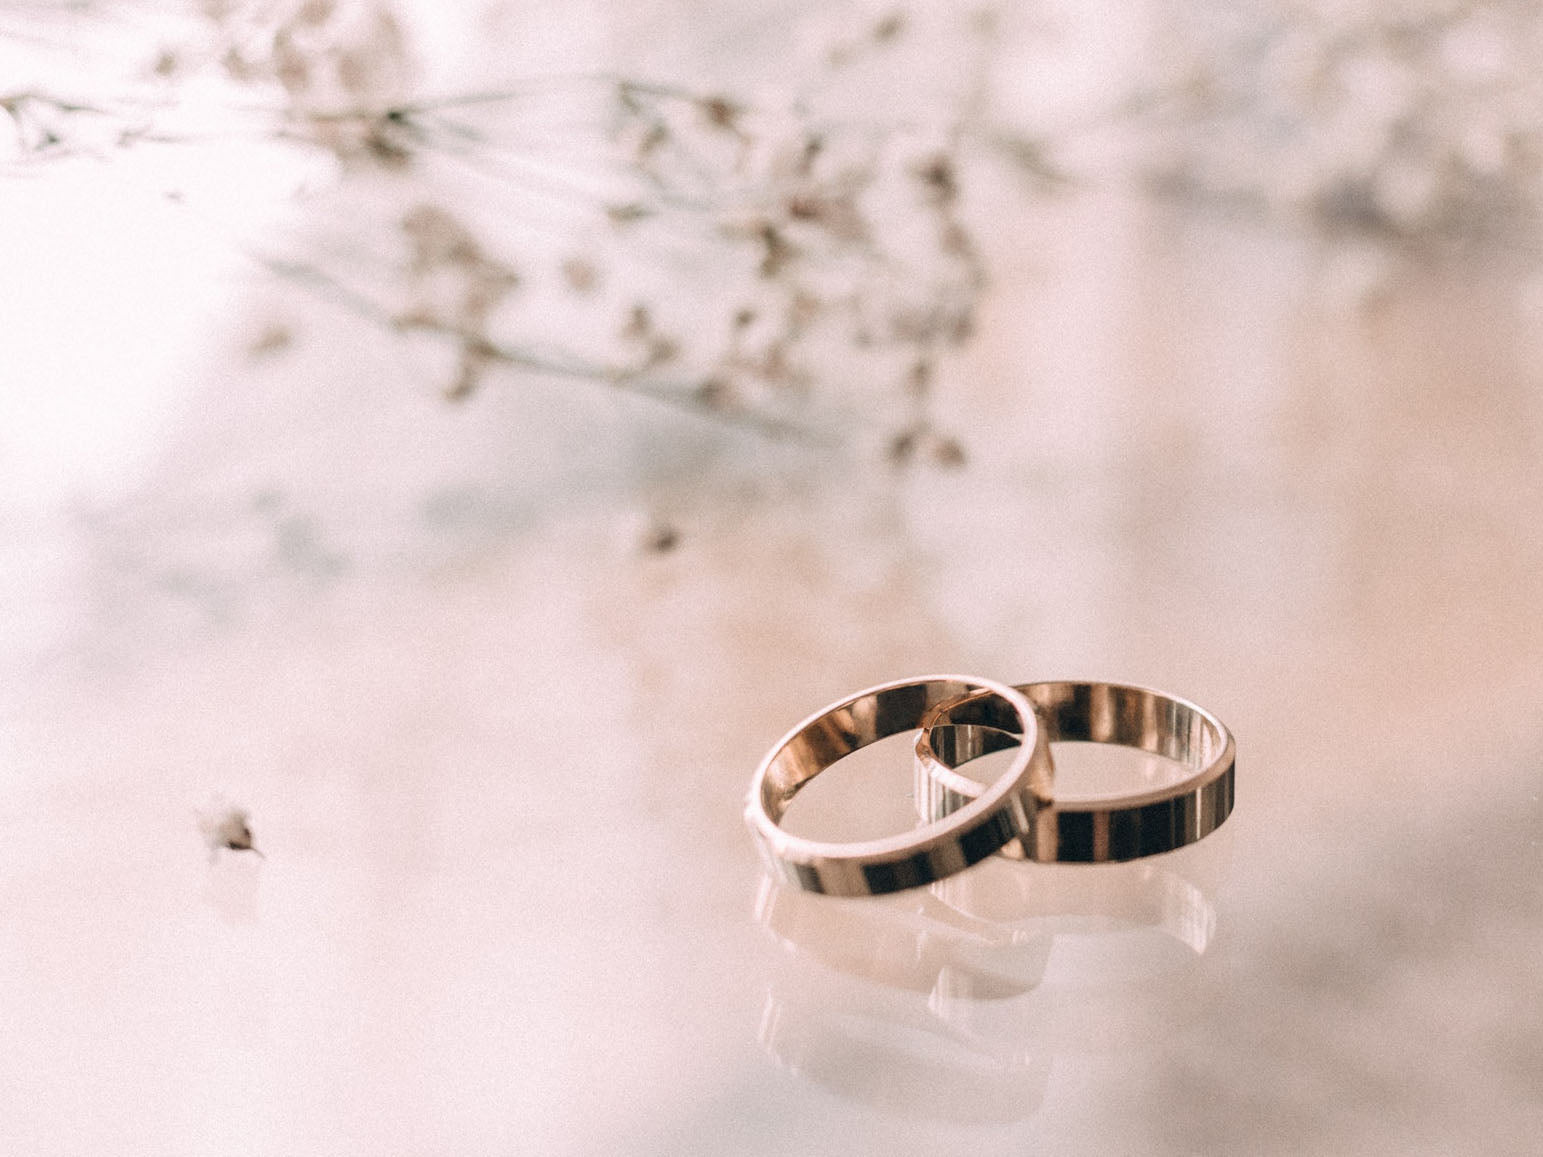 5 Things Not to Do With Your Wedding Ring On